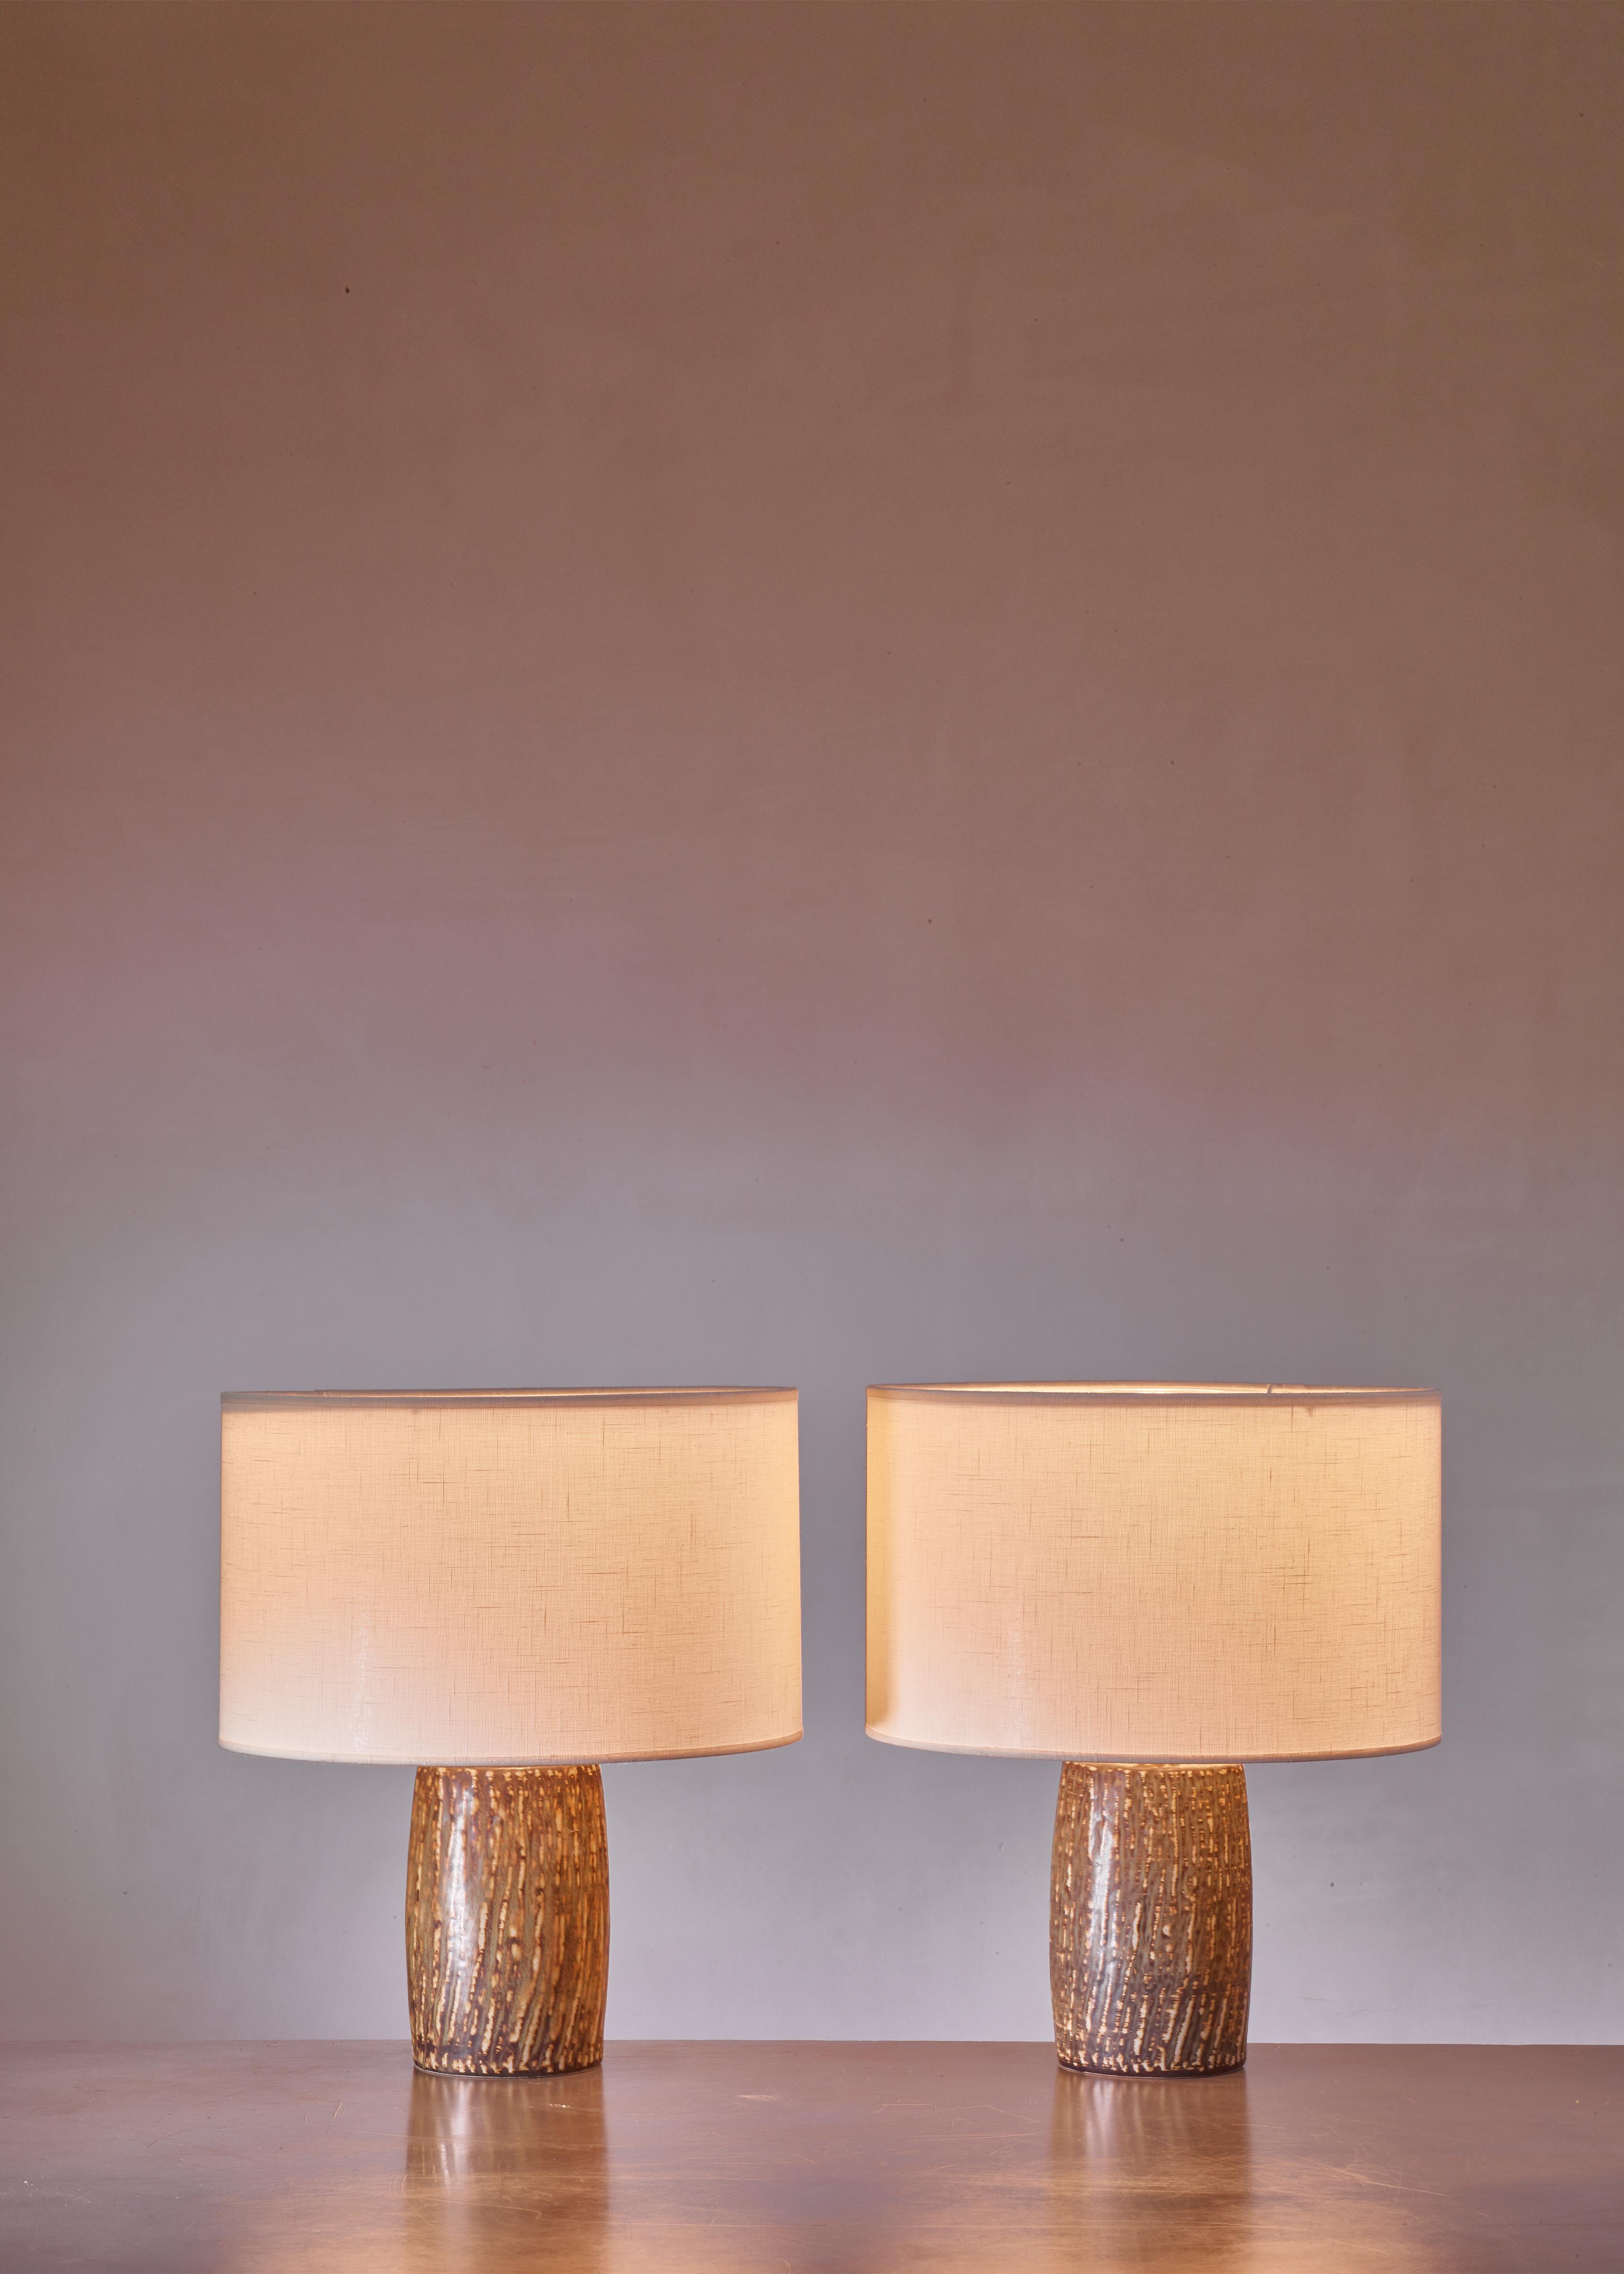 A pair of polychrome ceramic table lamps by Gunnar Nylund for Rörstrand, Sweden. The lamps have a slightly different but matching color pattern in natural earth tones. Marked by Nylund and Rörstrand and in an excellent condition.

The measurements